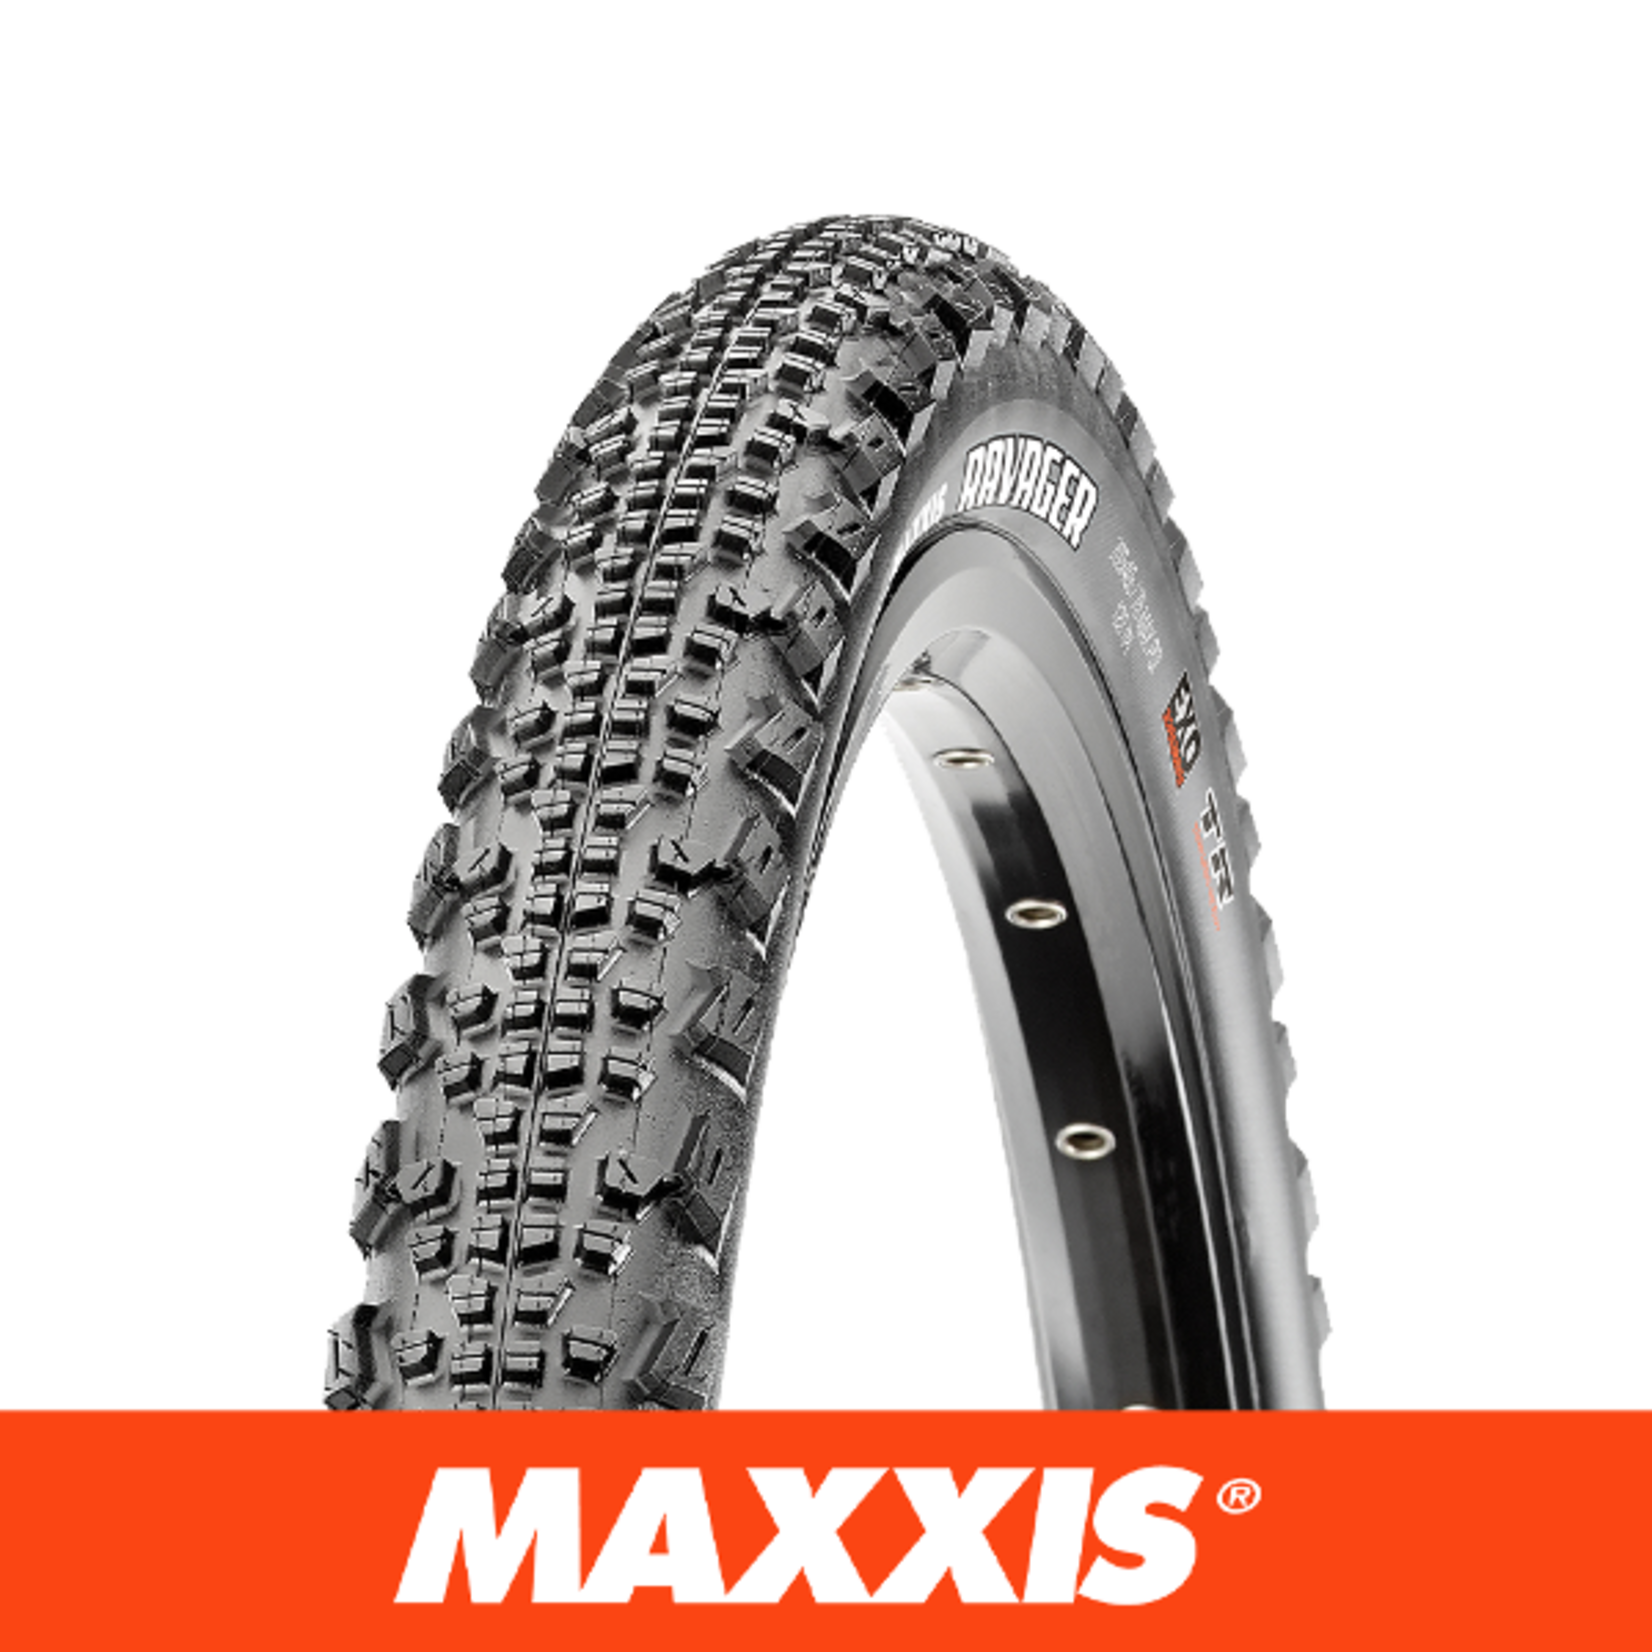 Maxxis Maxxis Ravager Bike Tyre - 700 X 40 - Folding 120Tpi Exo TR